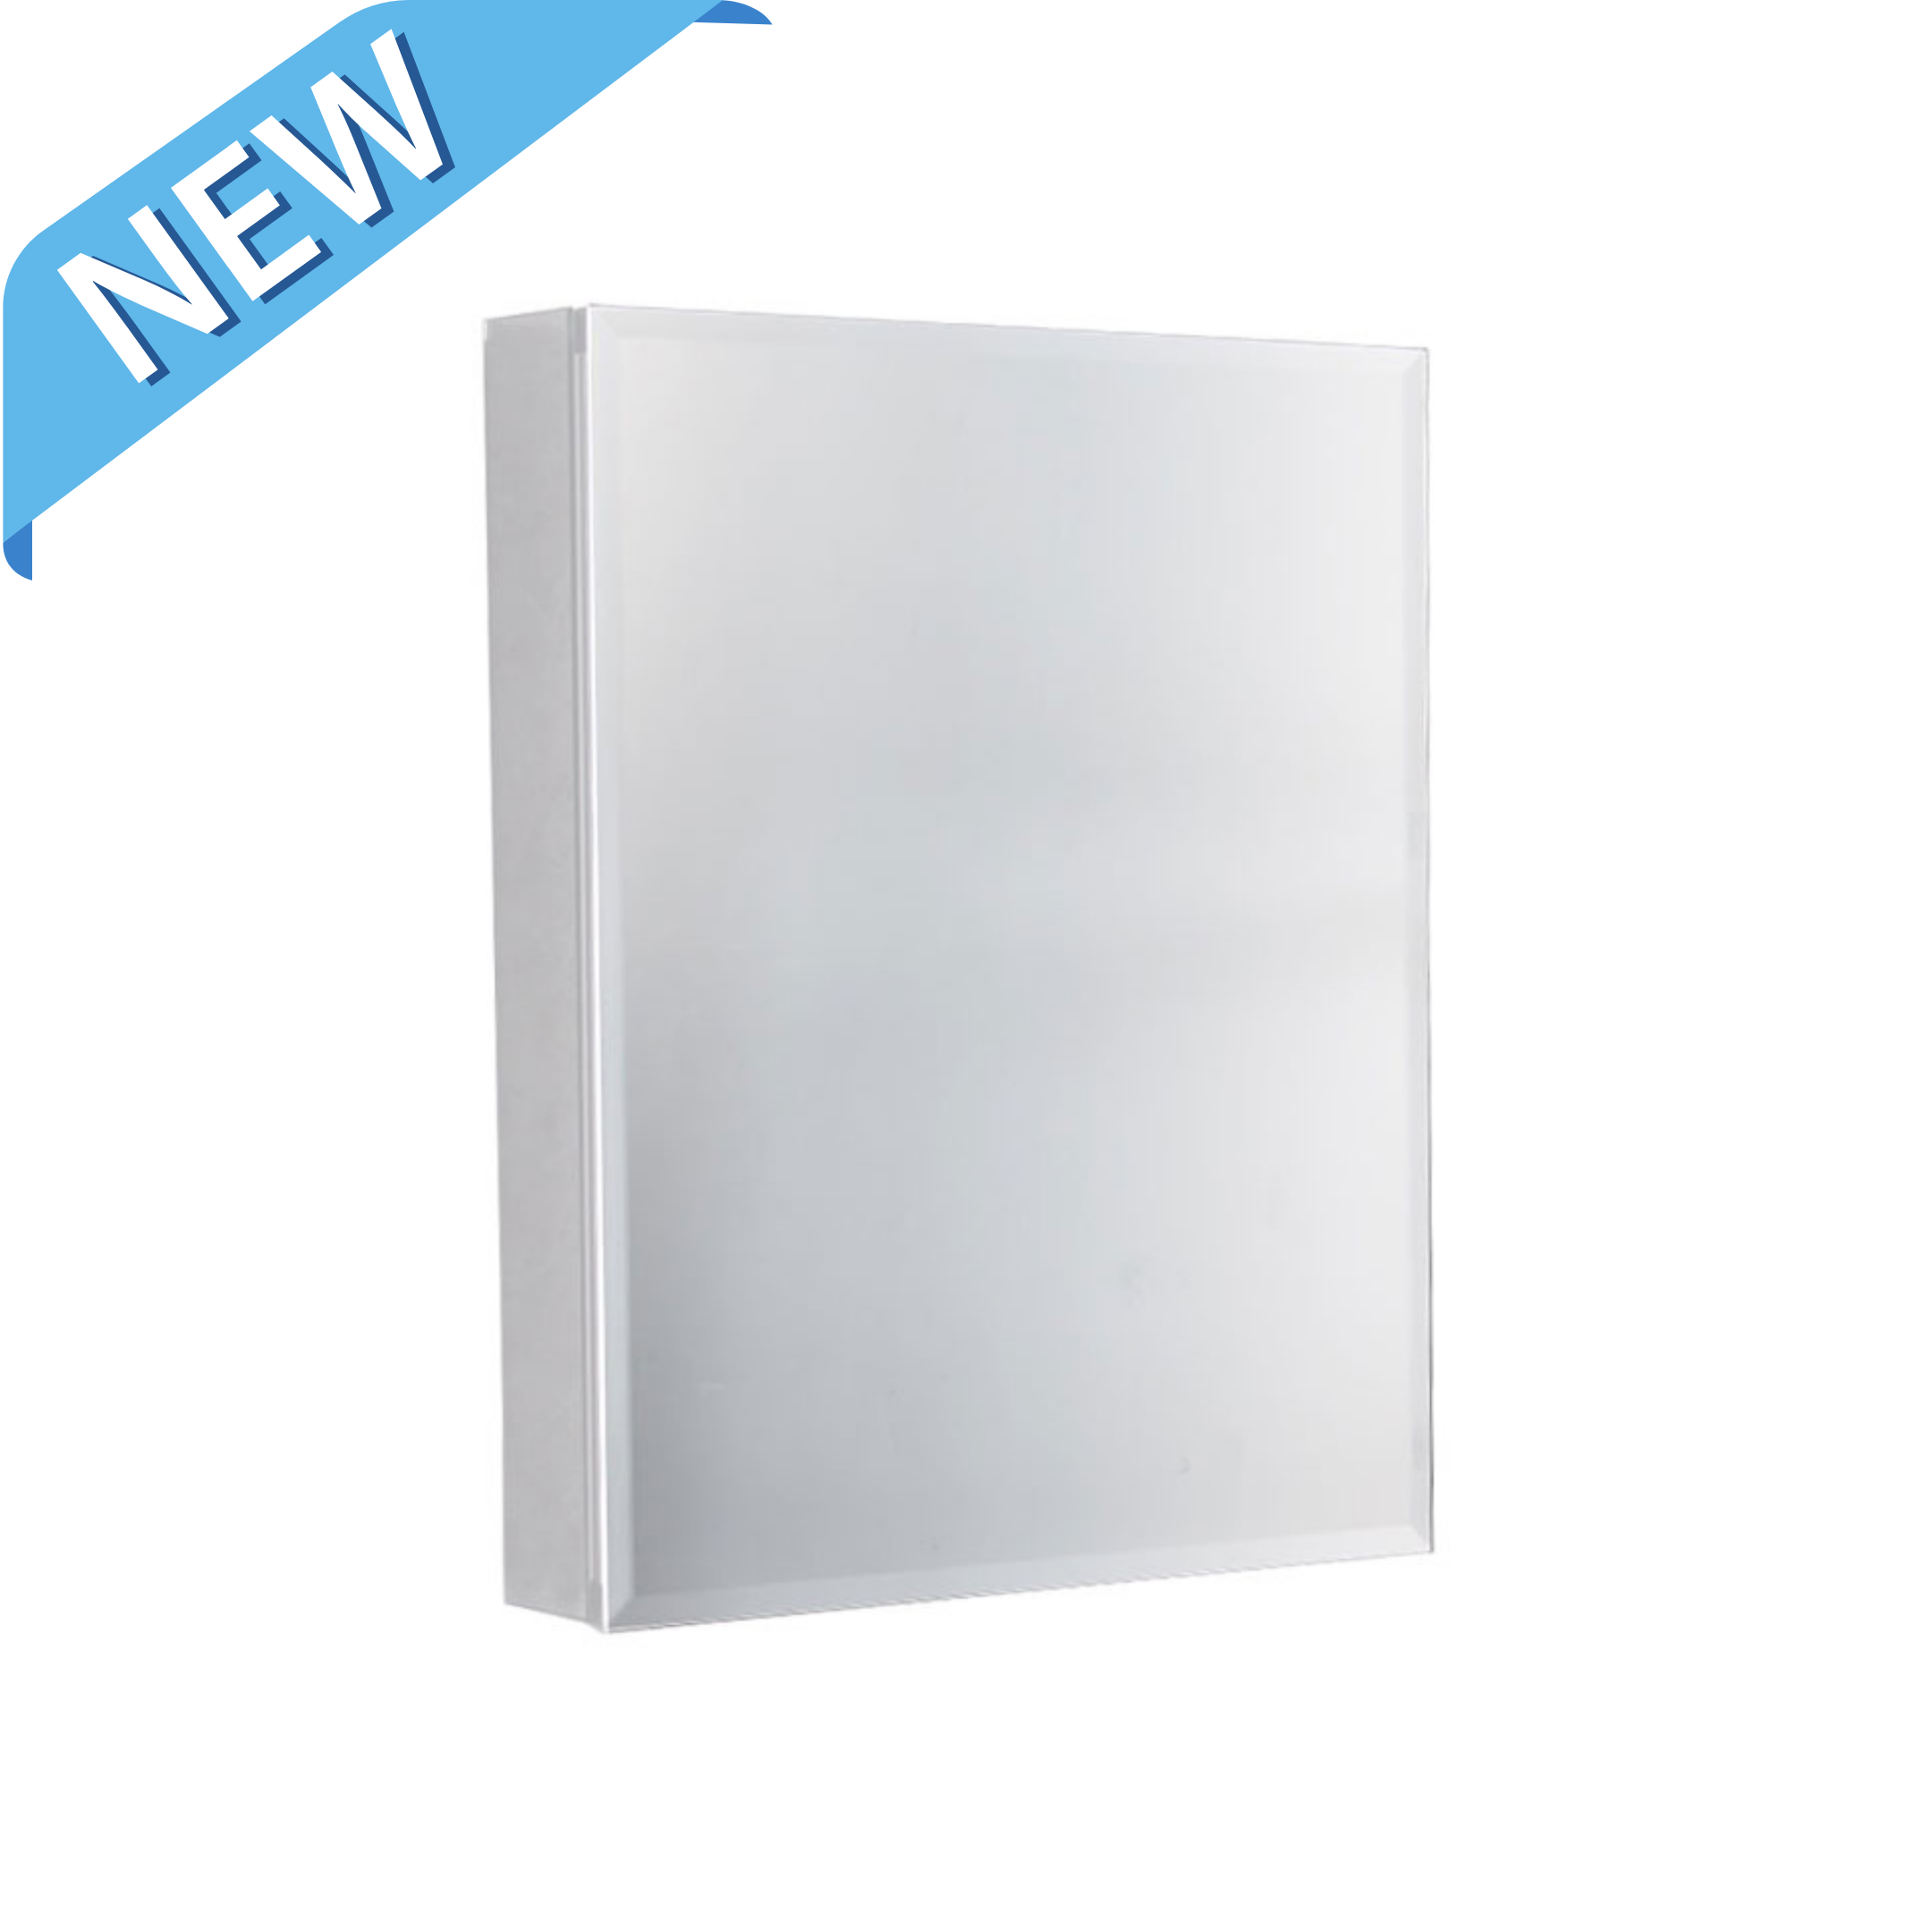 Upgrade Your Bathroom Storage with our 20x26 Inch Medicine Cabinet - Easy Installation, Copper-Free Silver Mirror, Adjustable Shelves, and Soft-Closing Hinges - Eco LED Lightings 